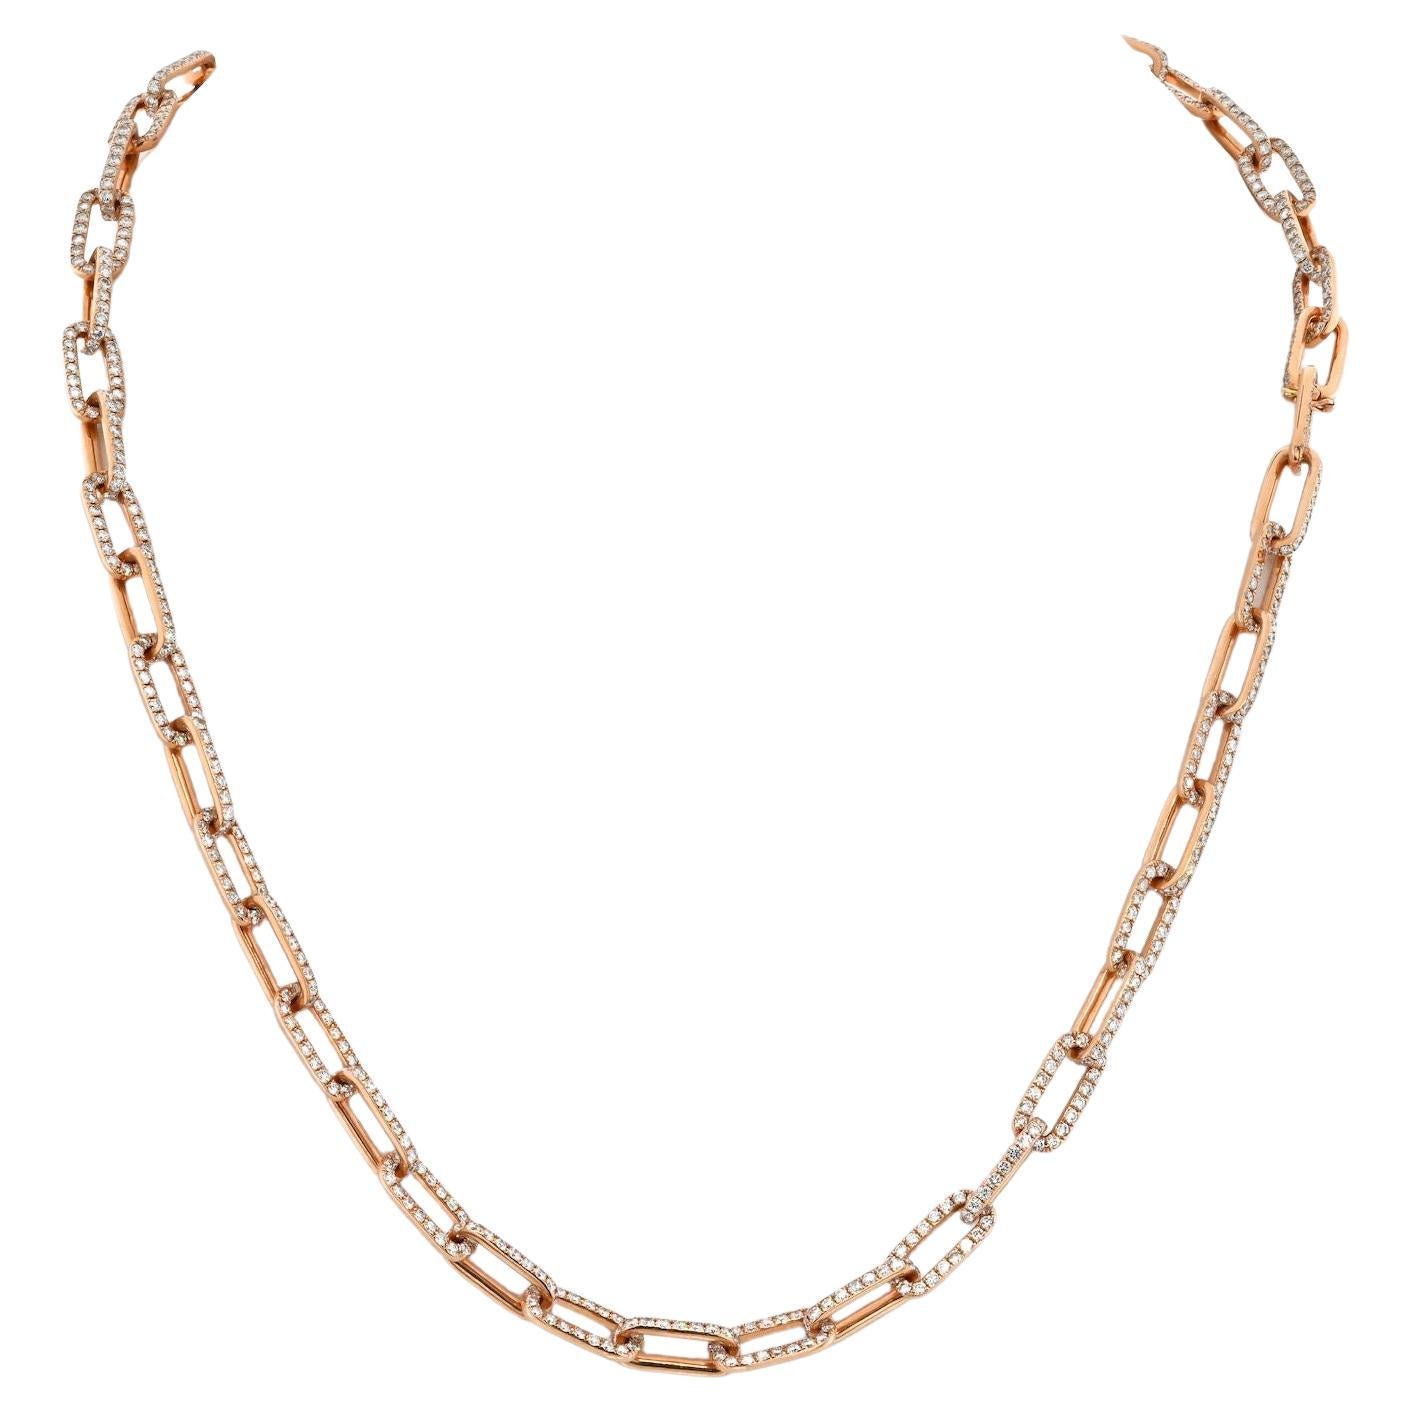 18K Rose Gold 21 Carat Diamond Link Chain Necklace For Sale